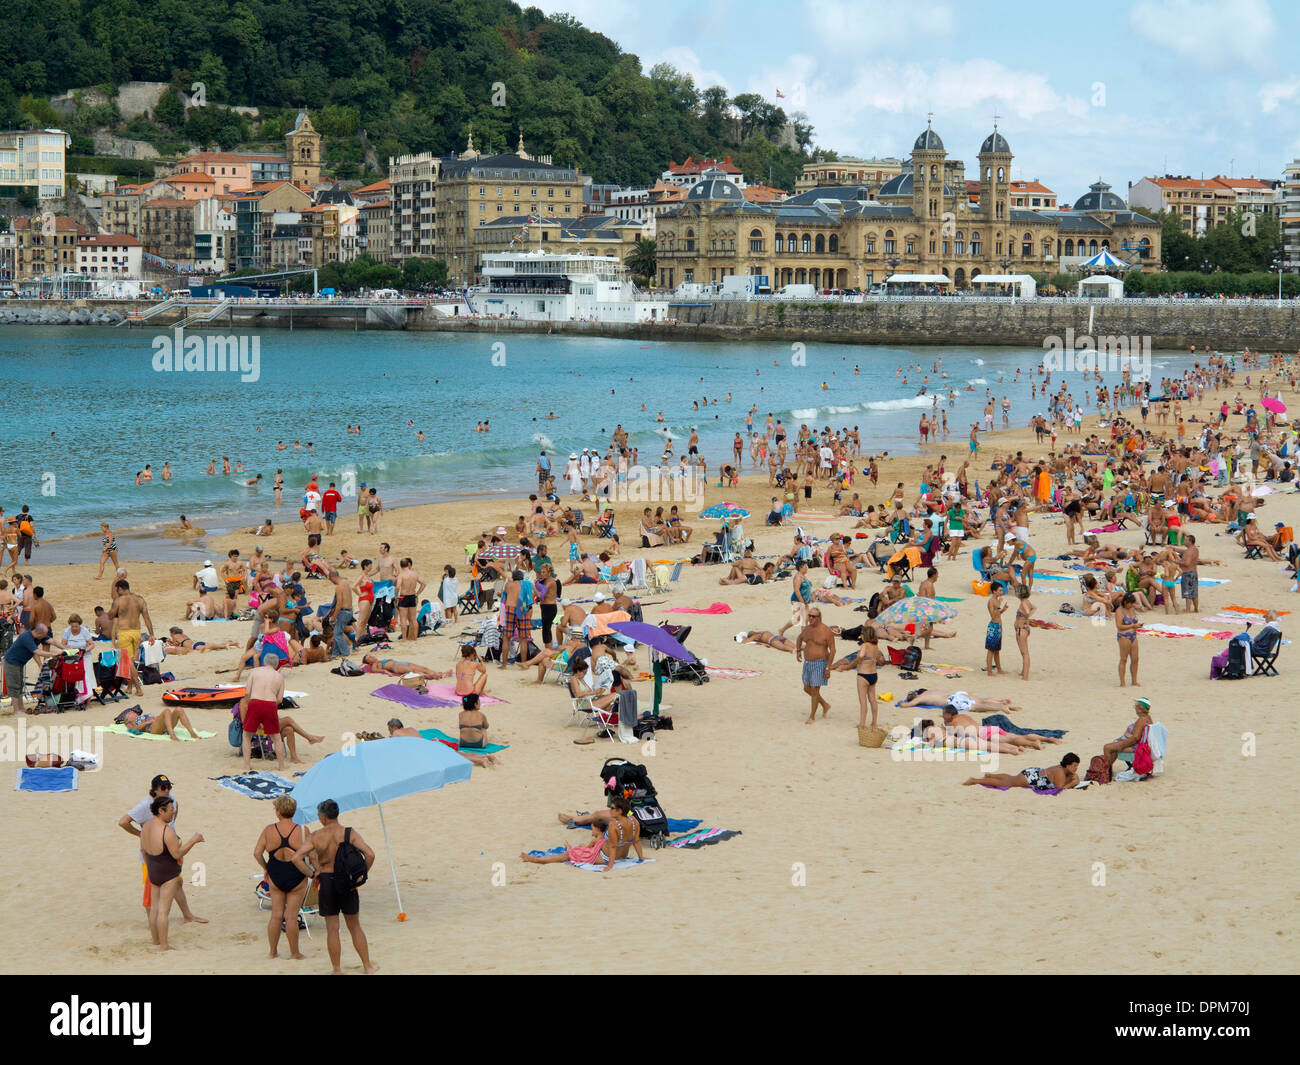 Families, swimmers and sunbathers relaxing at the weekend on La Concha beach, San Sebastian (Donostia), Basque Country, Spain Stock Photo